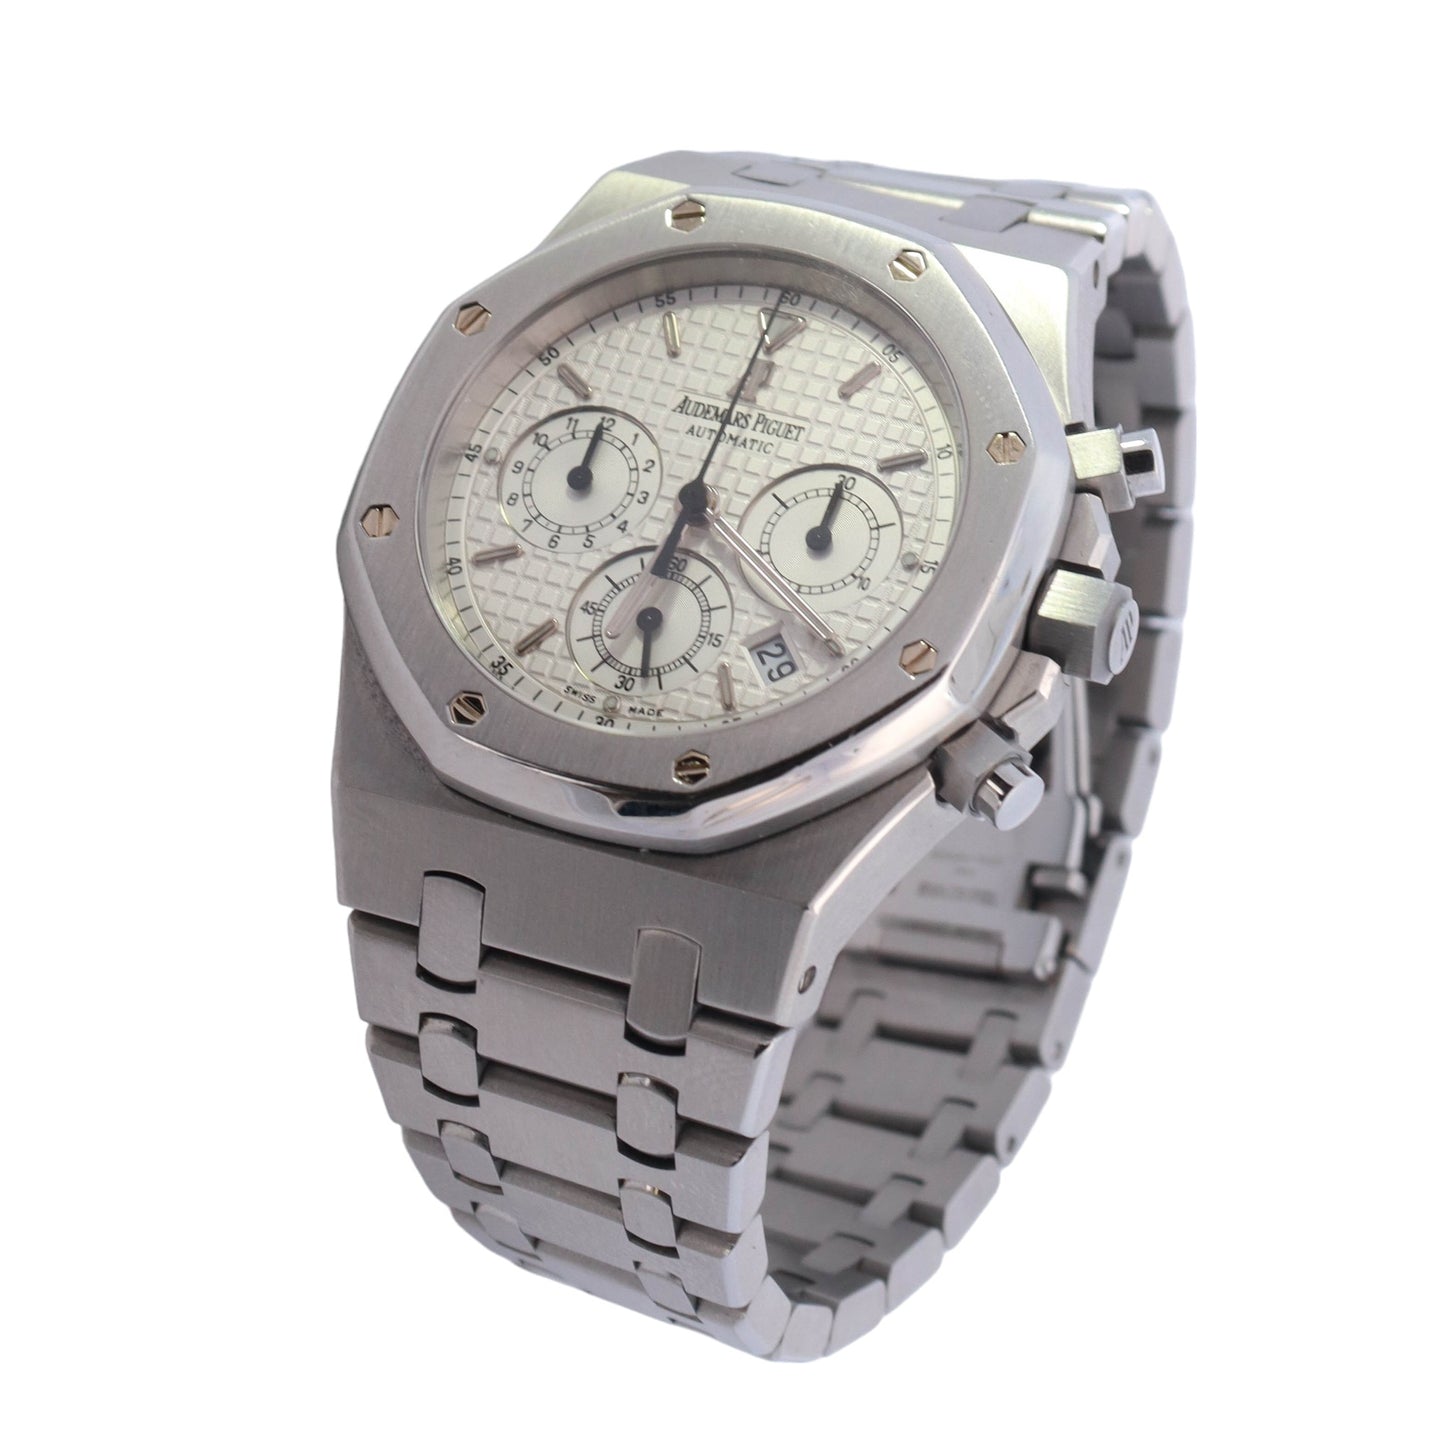 Audemars Piguet Royal Oak Chronograph Stainless Steel 39mm White Chronograph Stick Dial Watch Reference #: 25860ST.OO.1110ST.05 - Happy Jewelers Fine Jewelry Lifetime Warranty